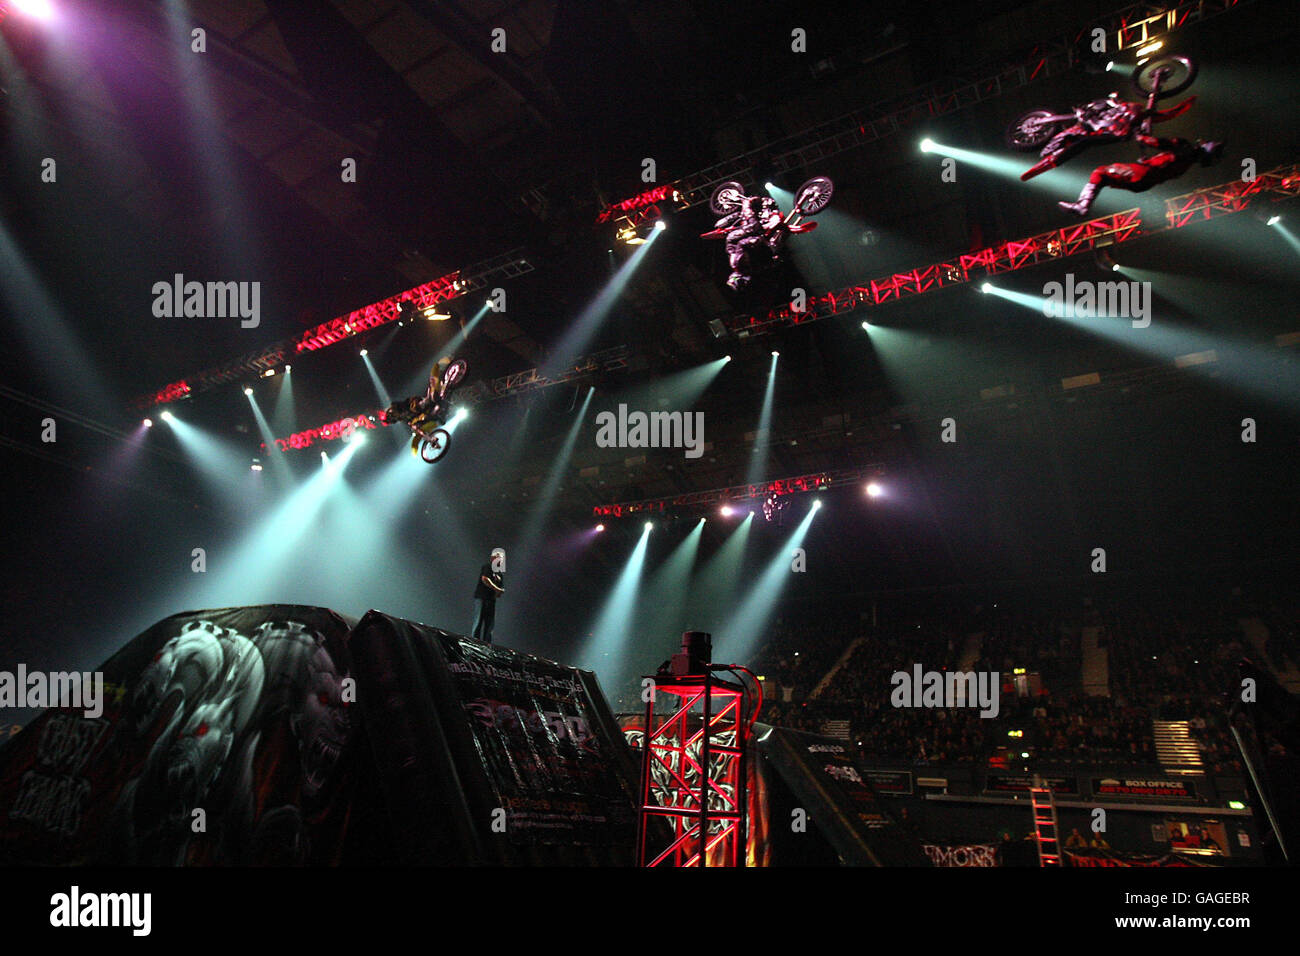 Daredevil extreme sports stars The Crusty Demons perform at Wembley Arena in north London. Stock Photo